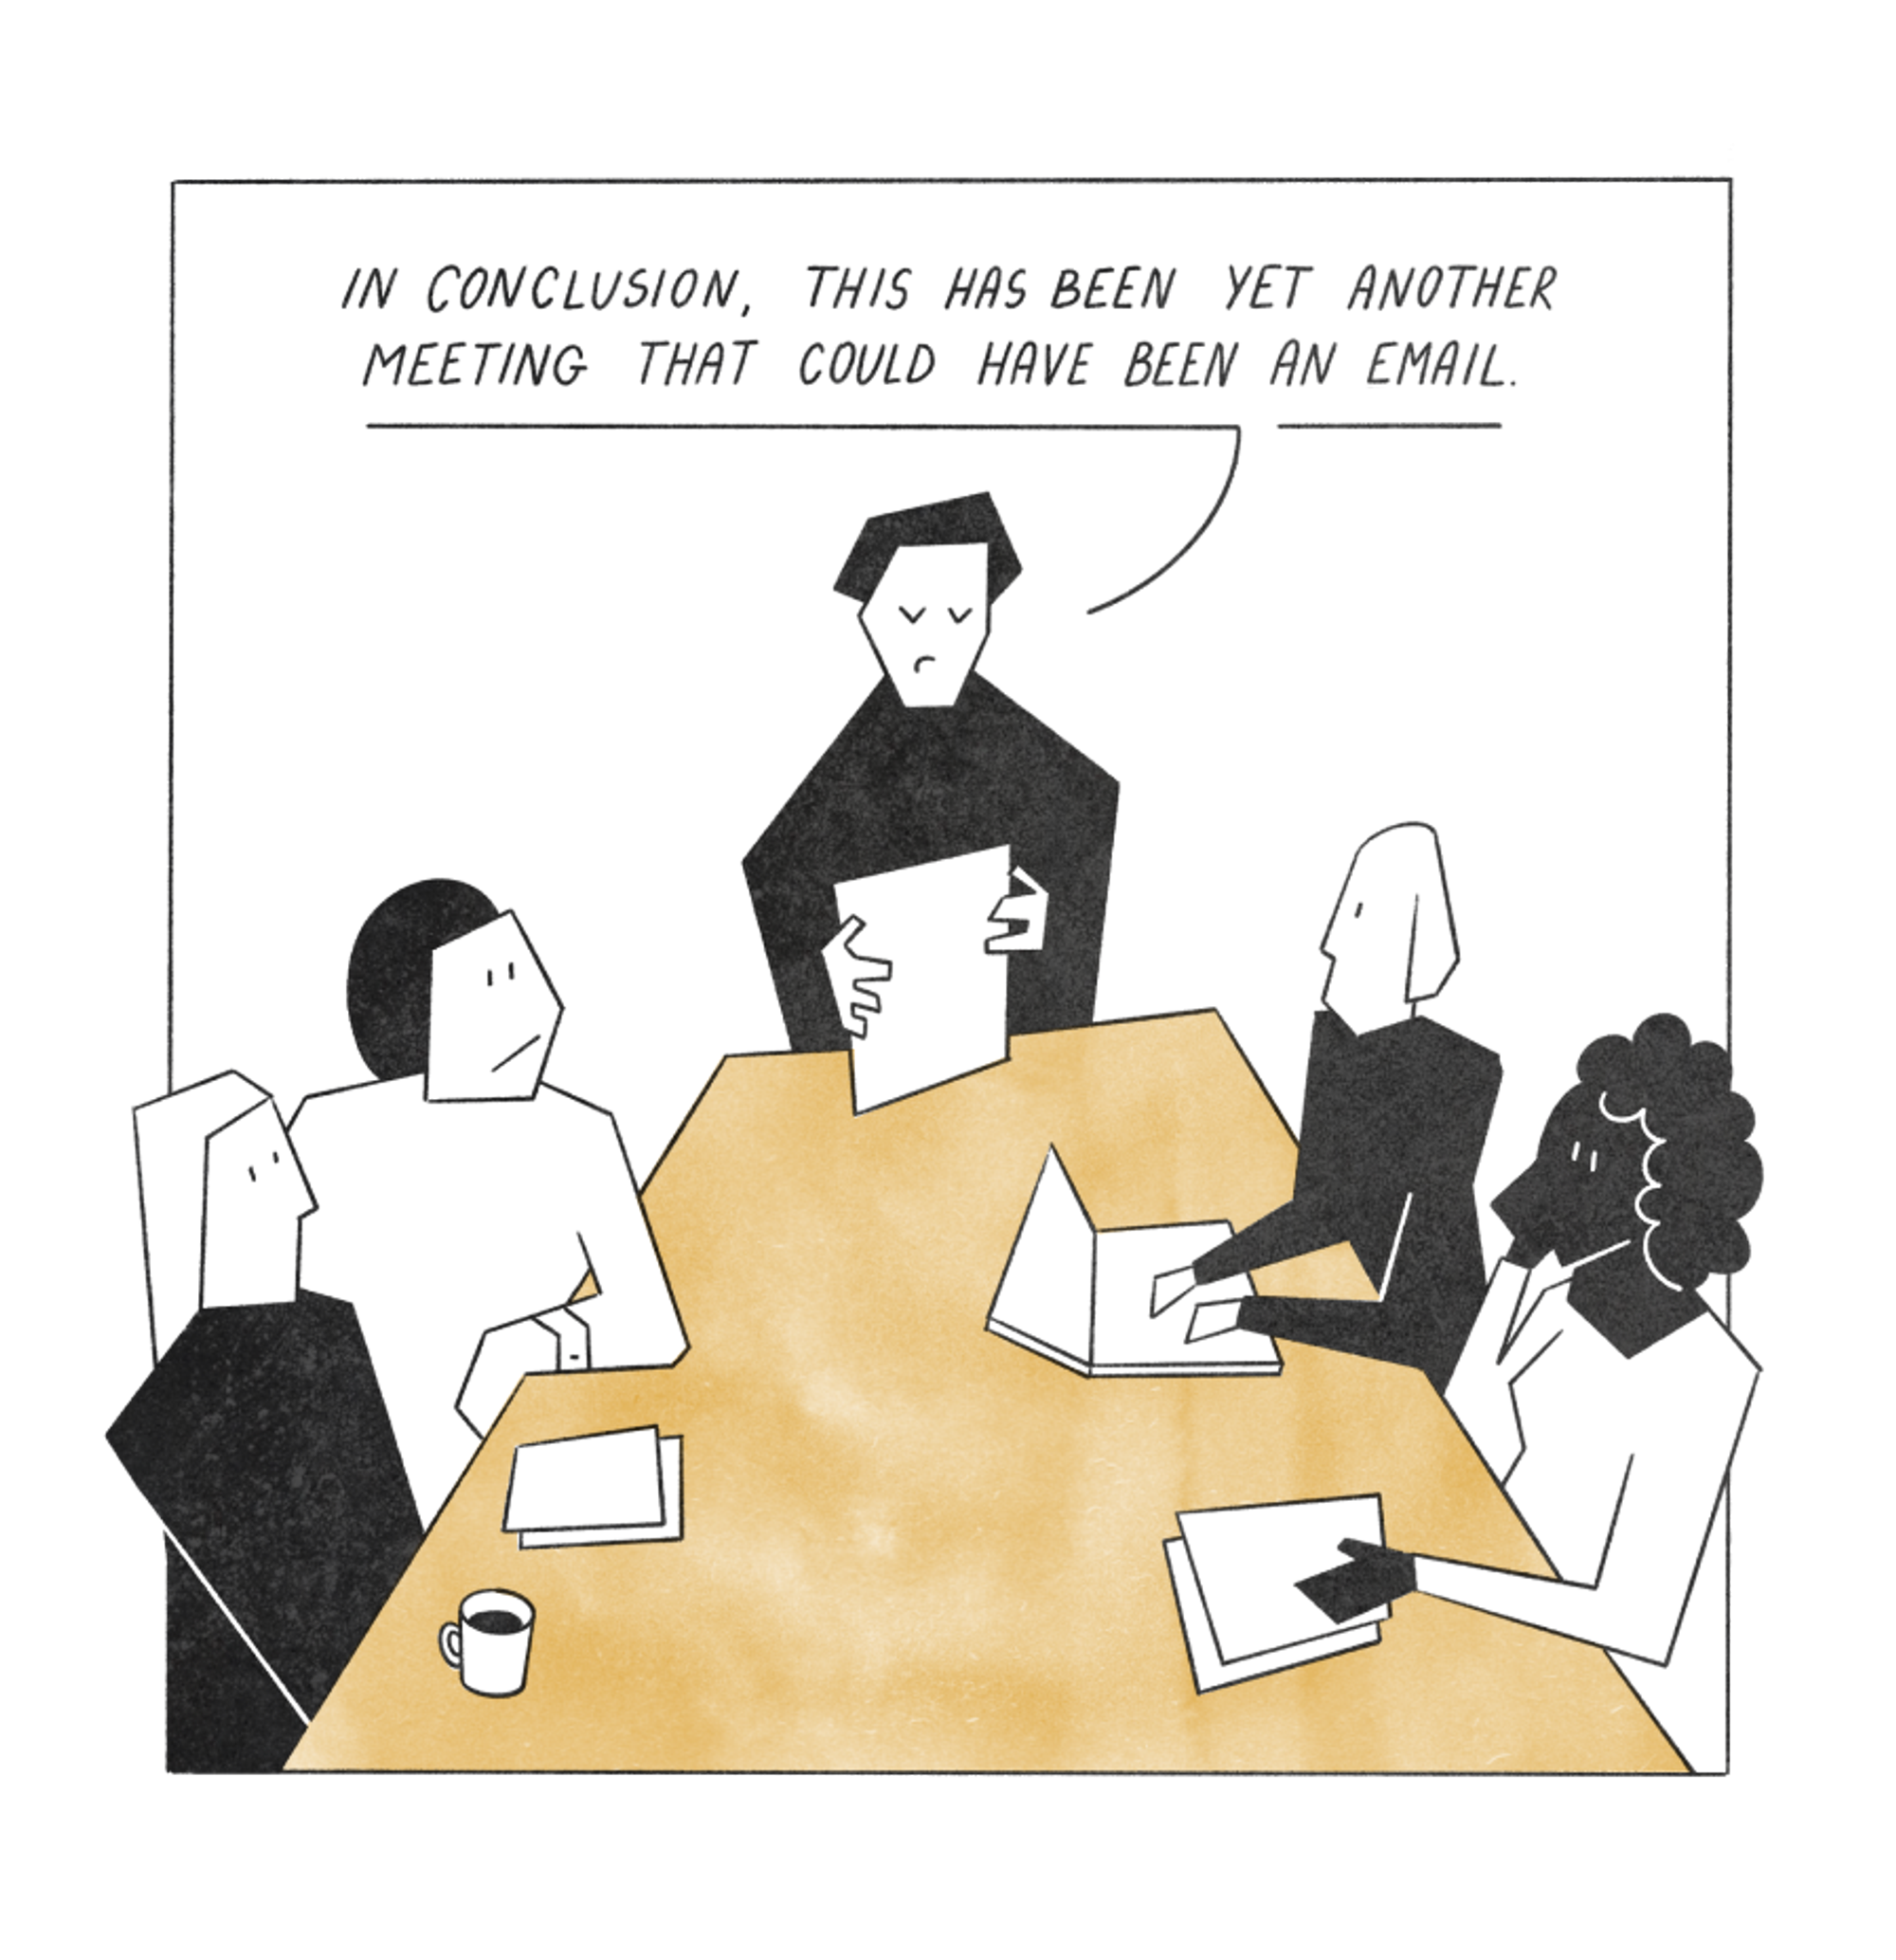 The flipped meeting model